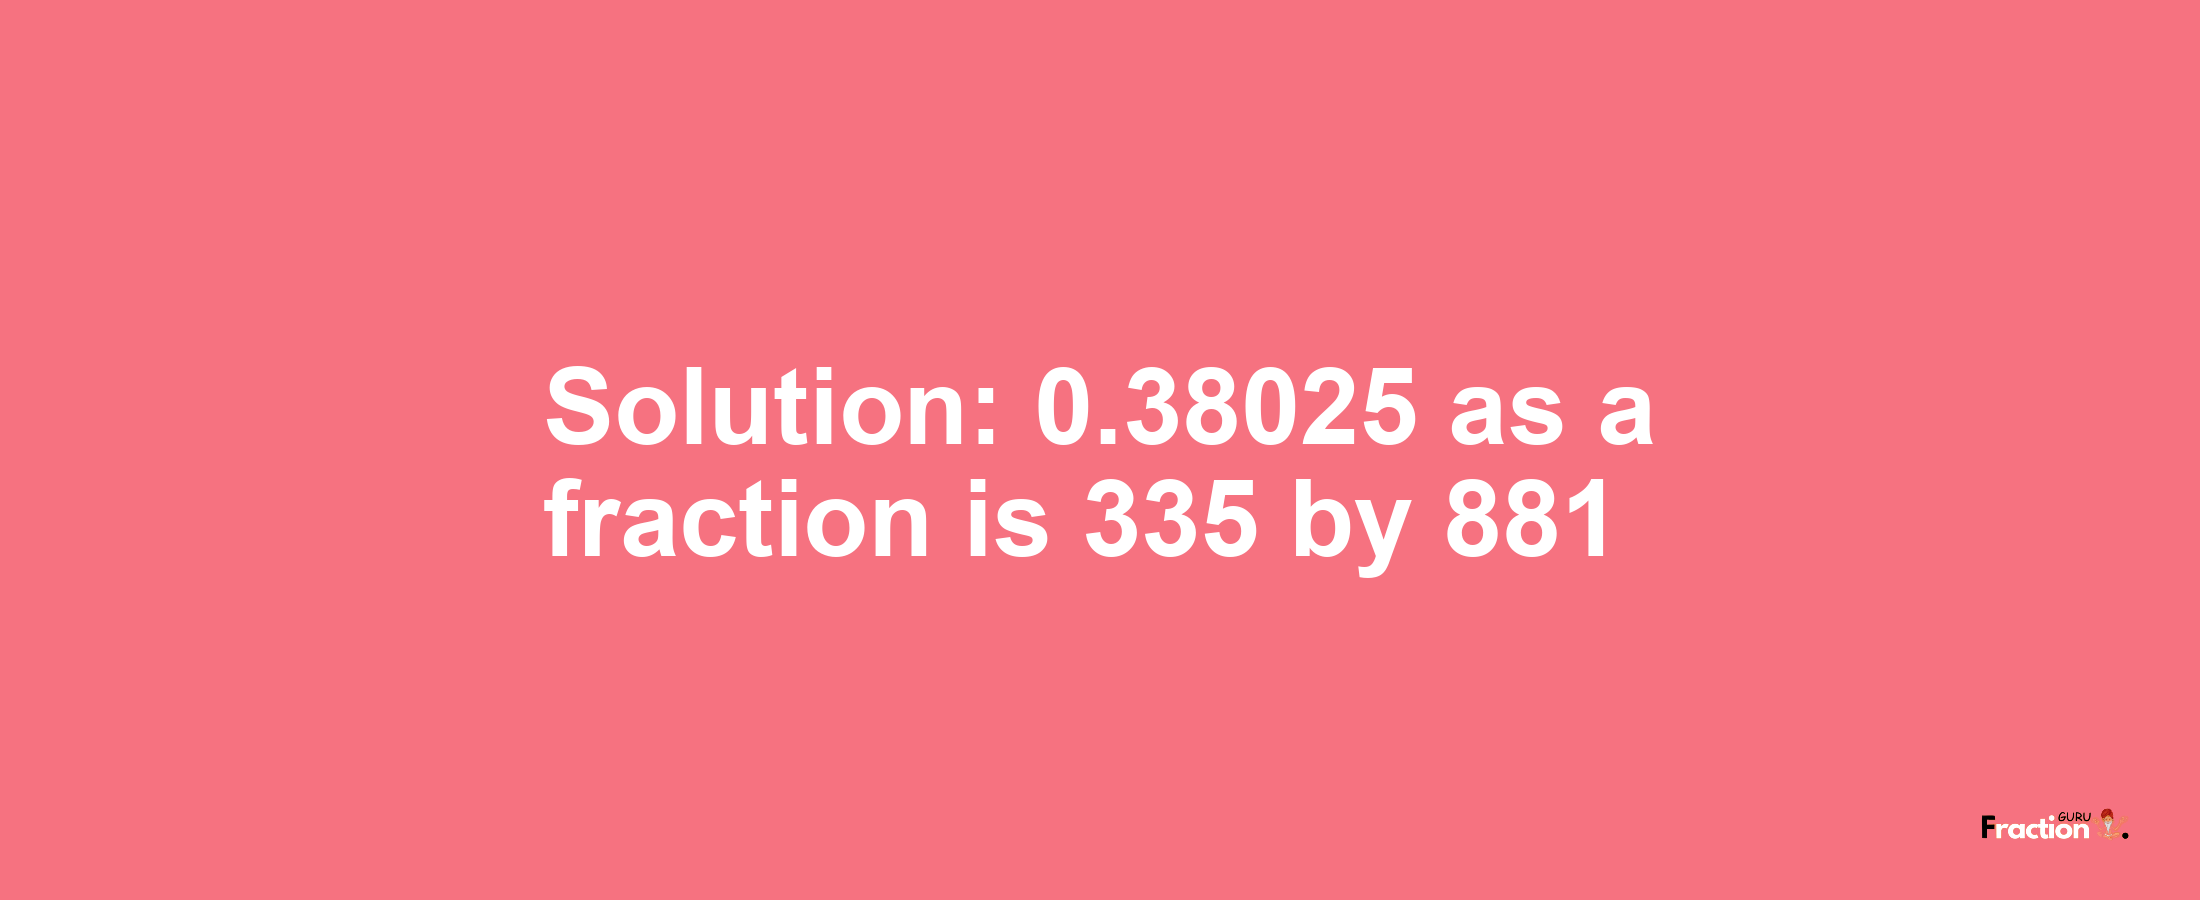 Solution:0.38025 as a fraction is 335/881